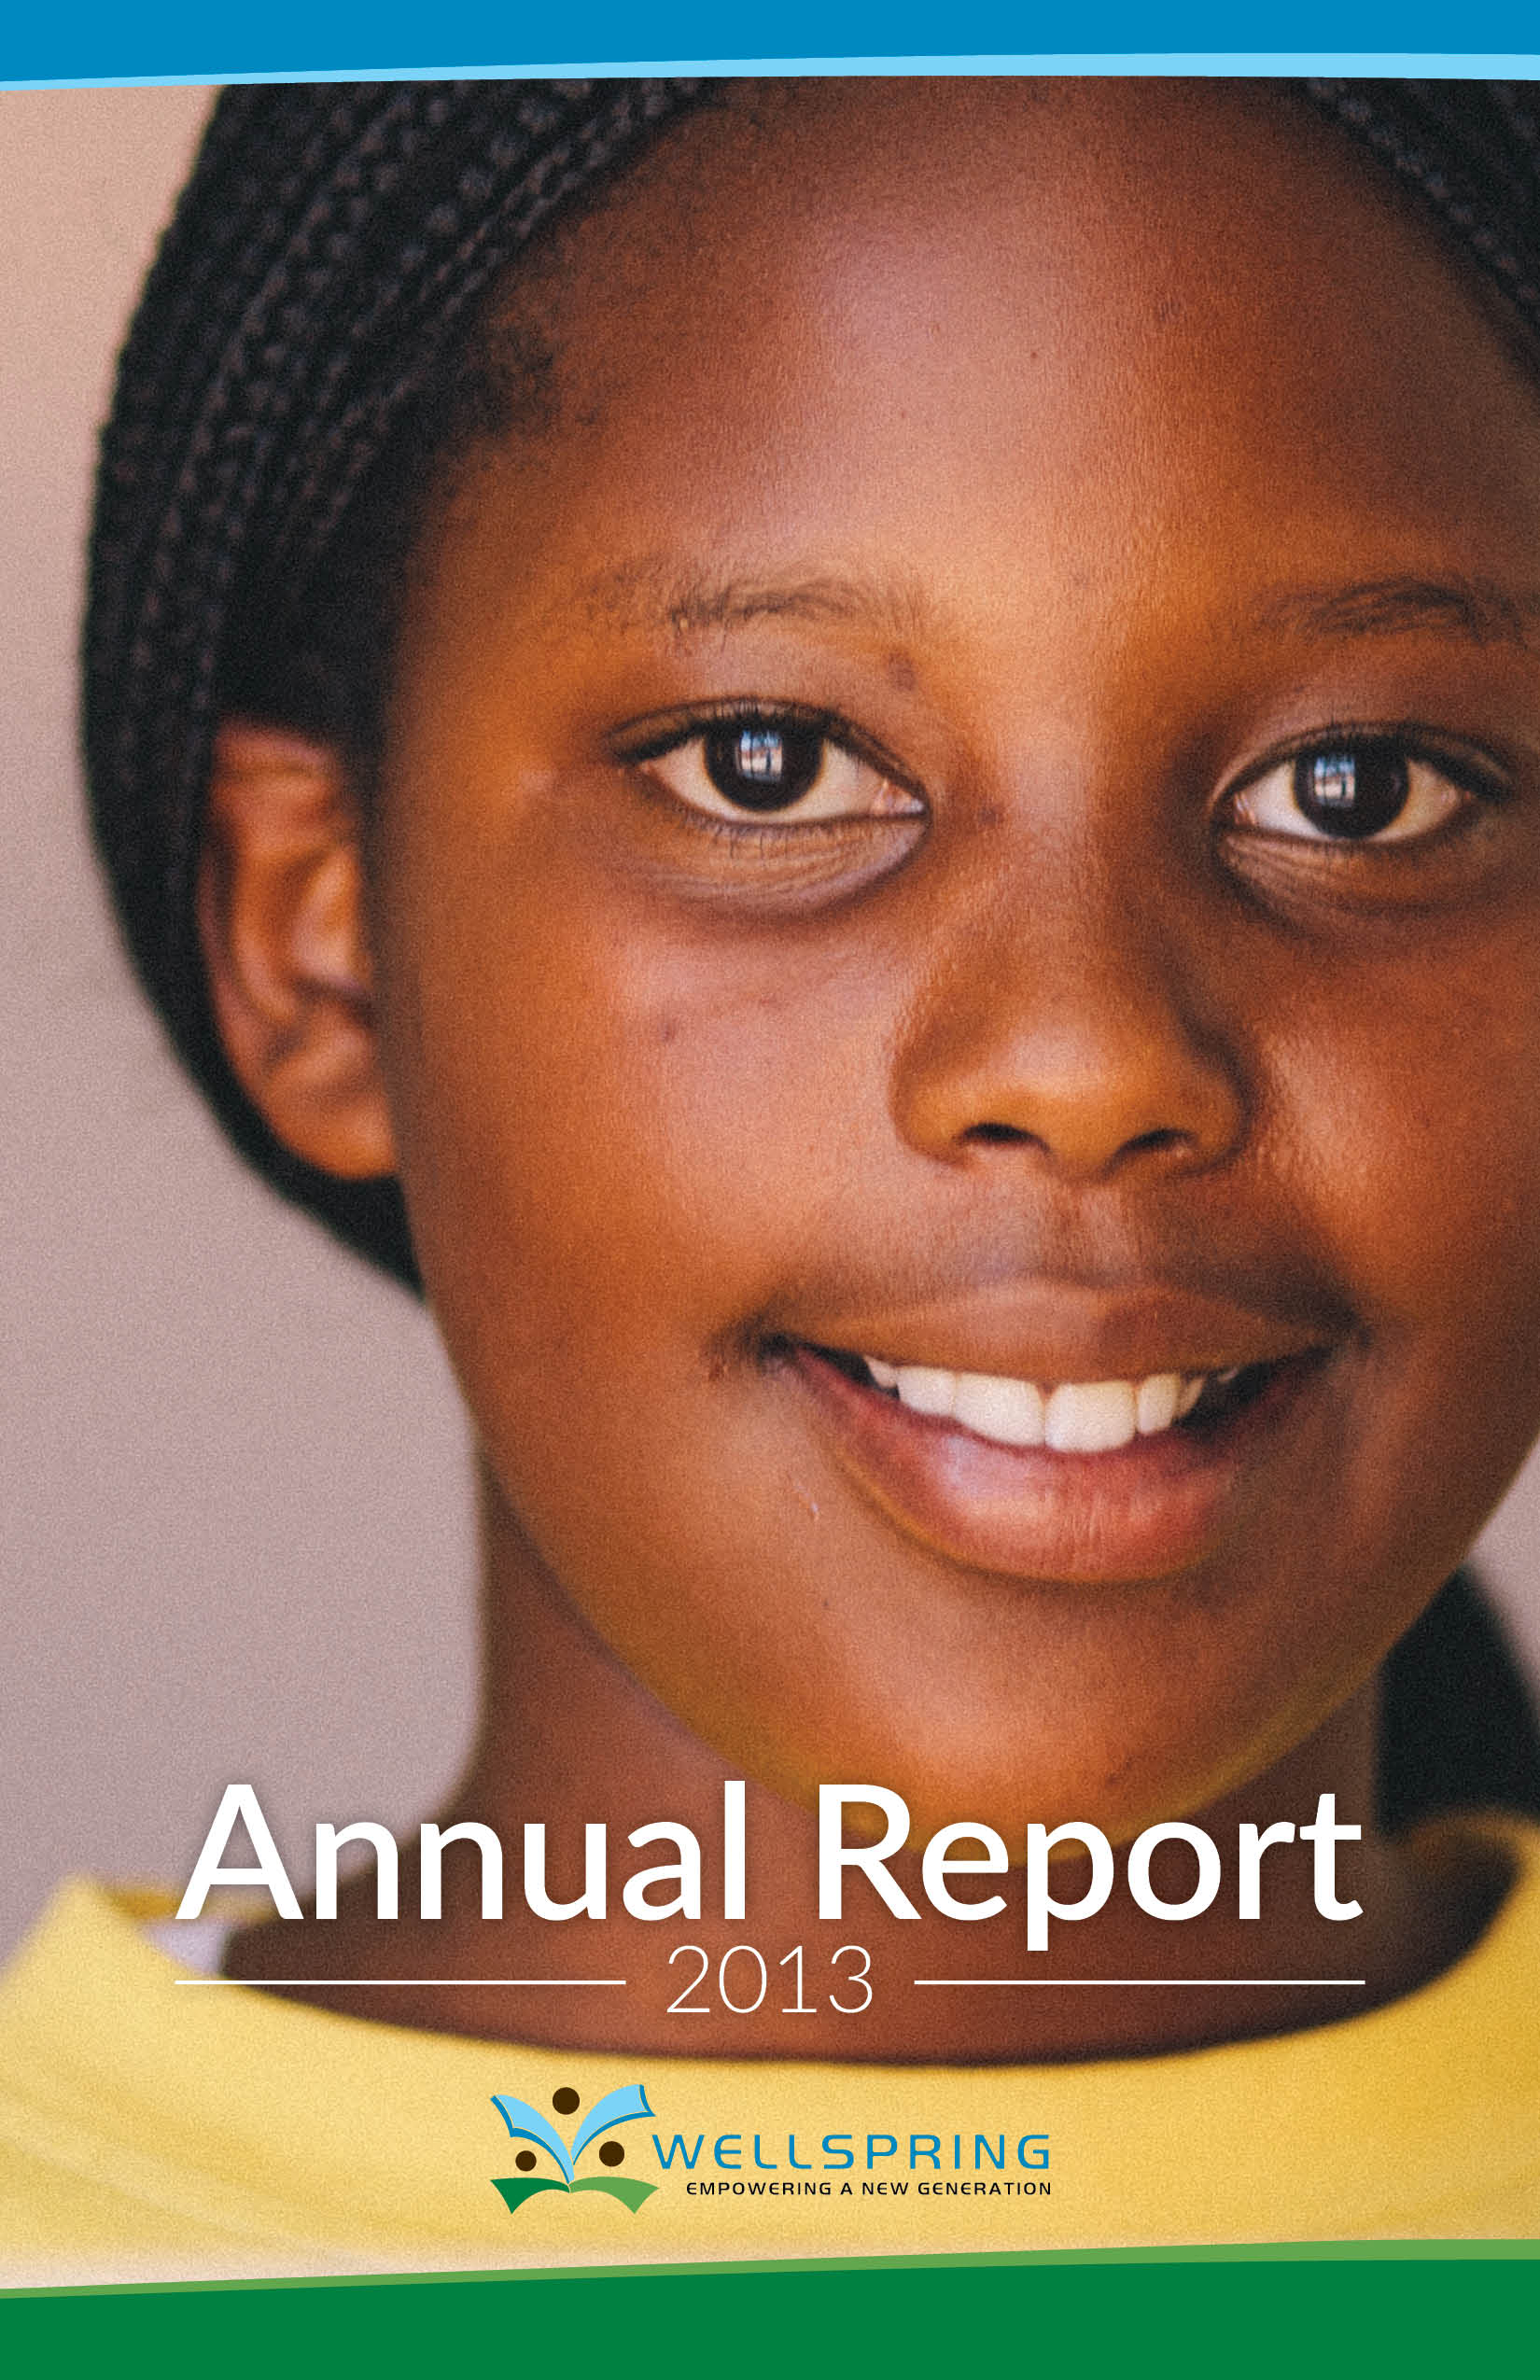 Wellspring Foundation Annual Report 2013 Cover